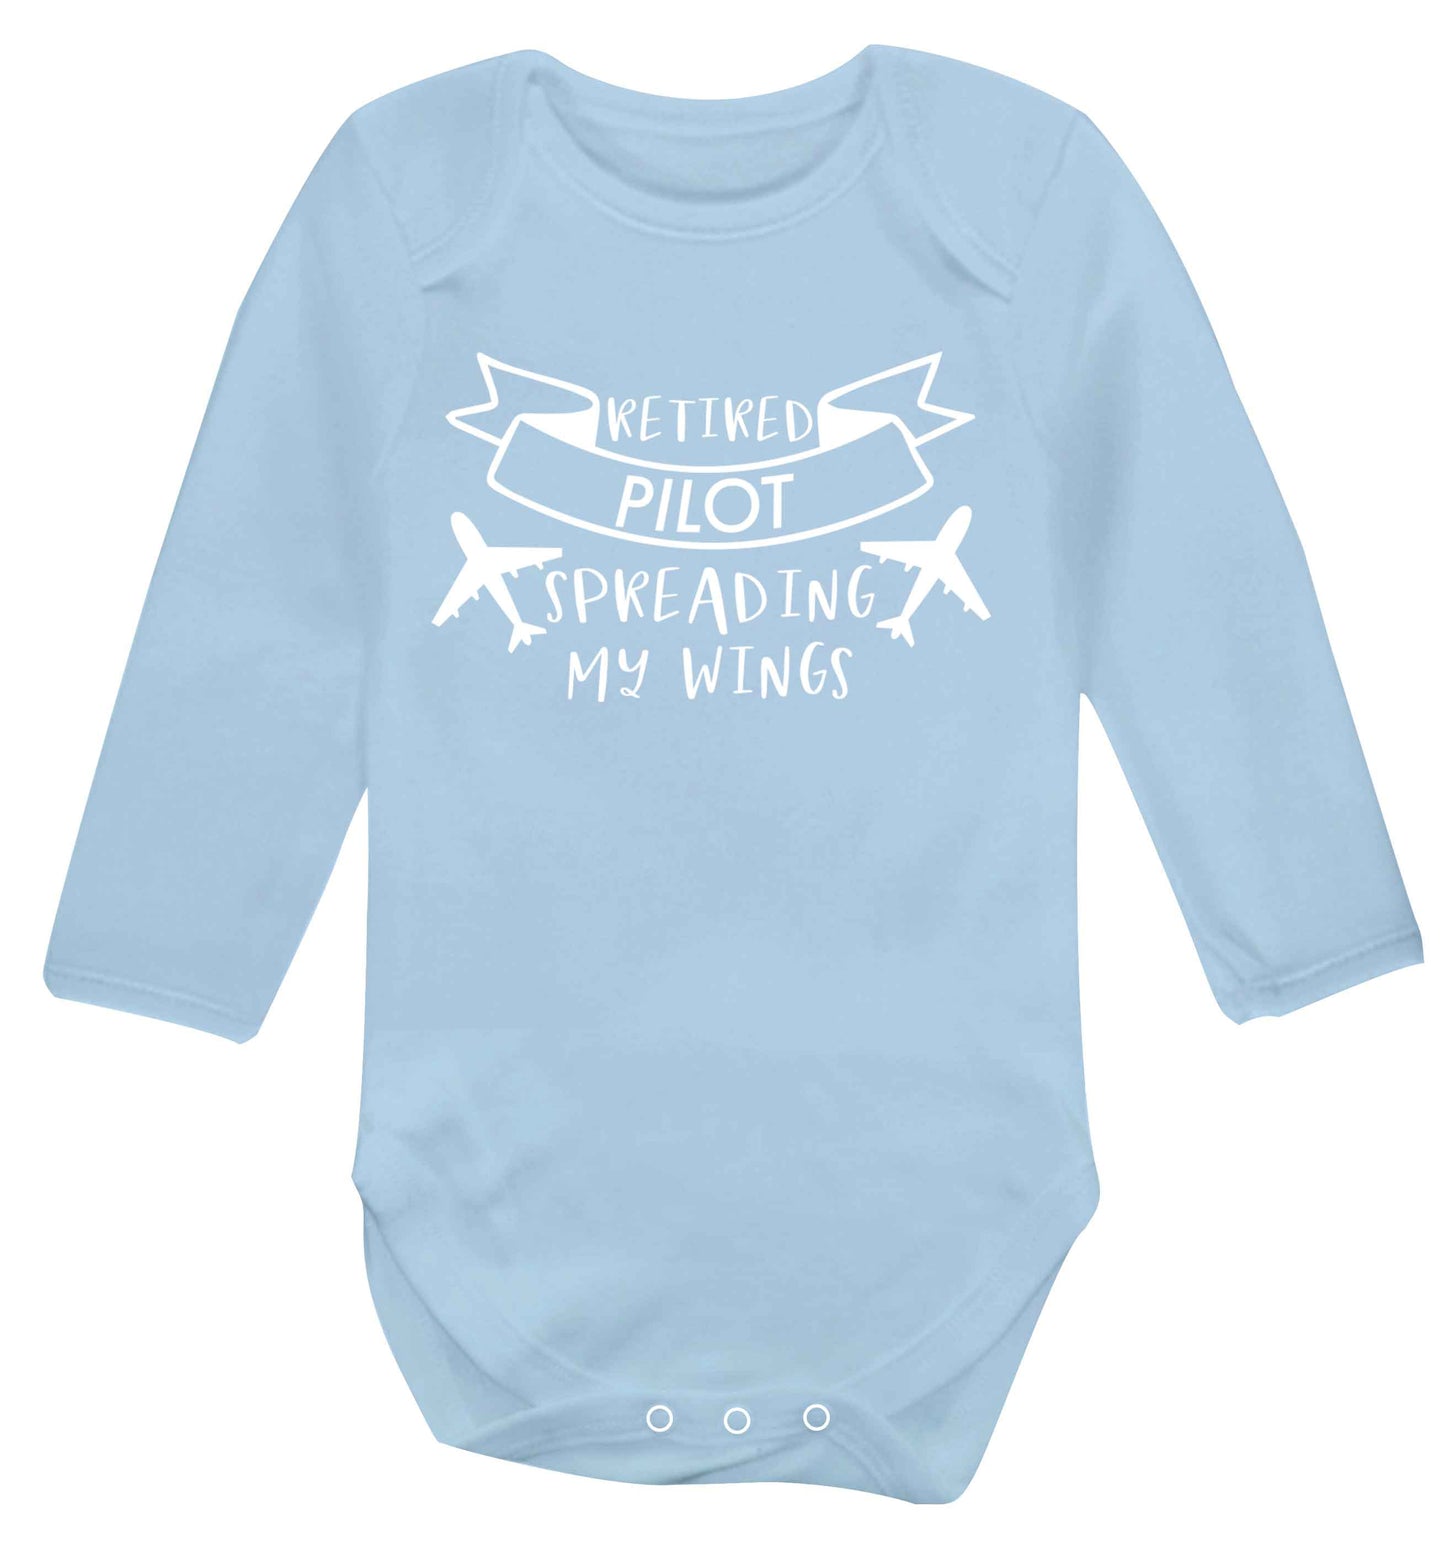 Retired pilot spreading my wings Baby Vest long sleeved pale blue 6-12 months